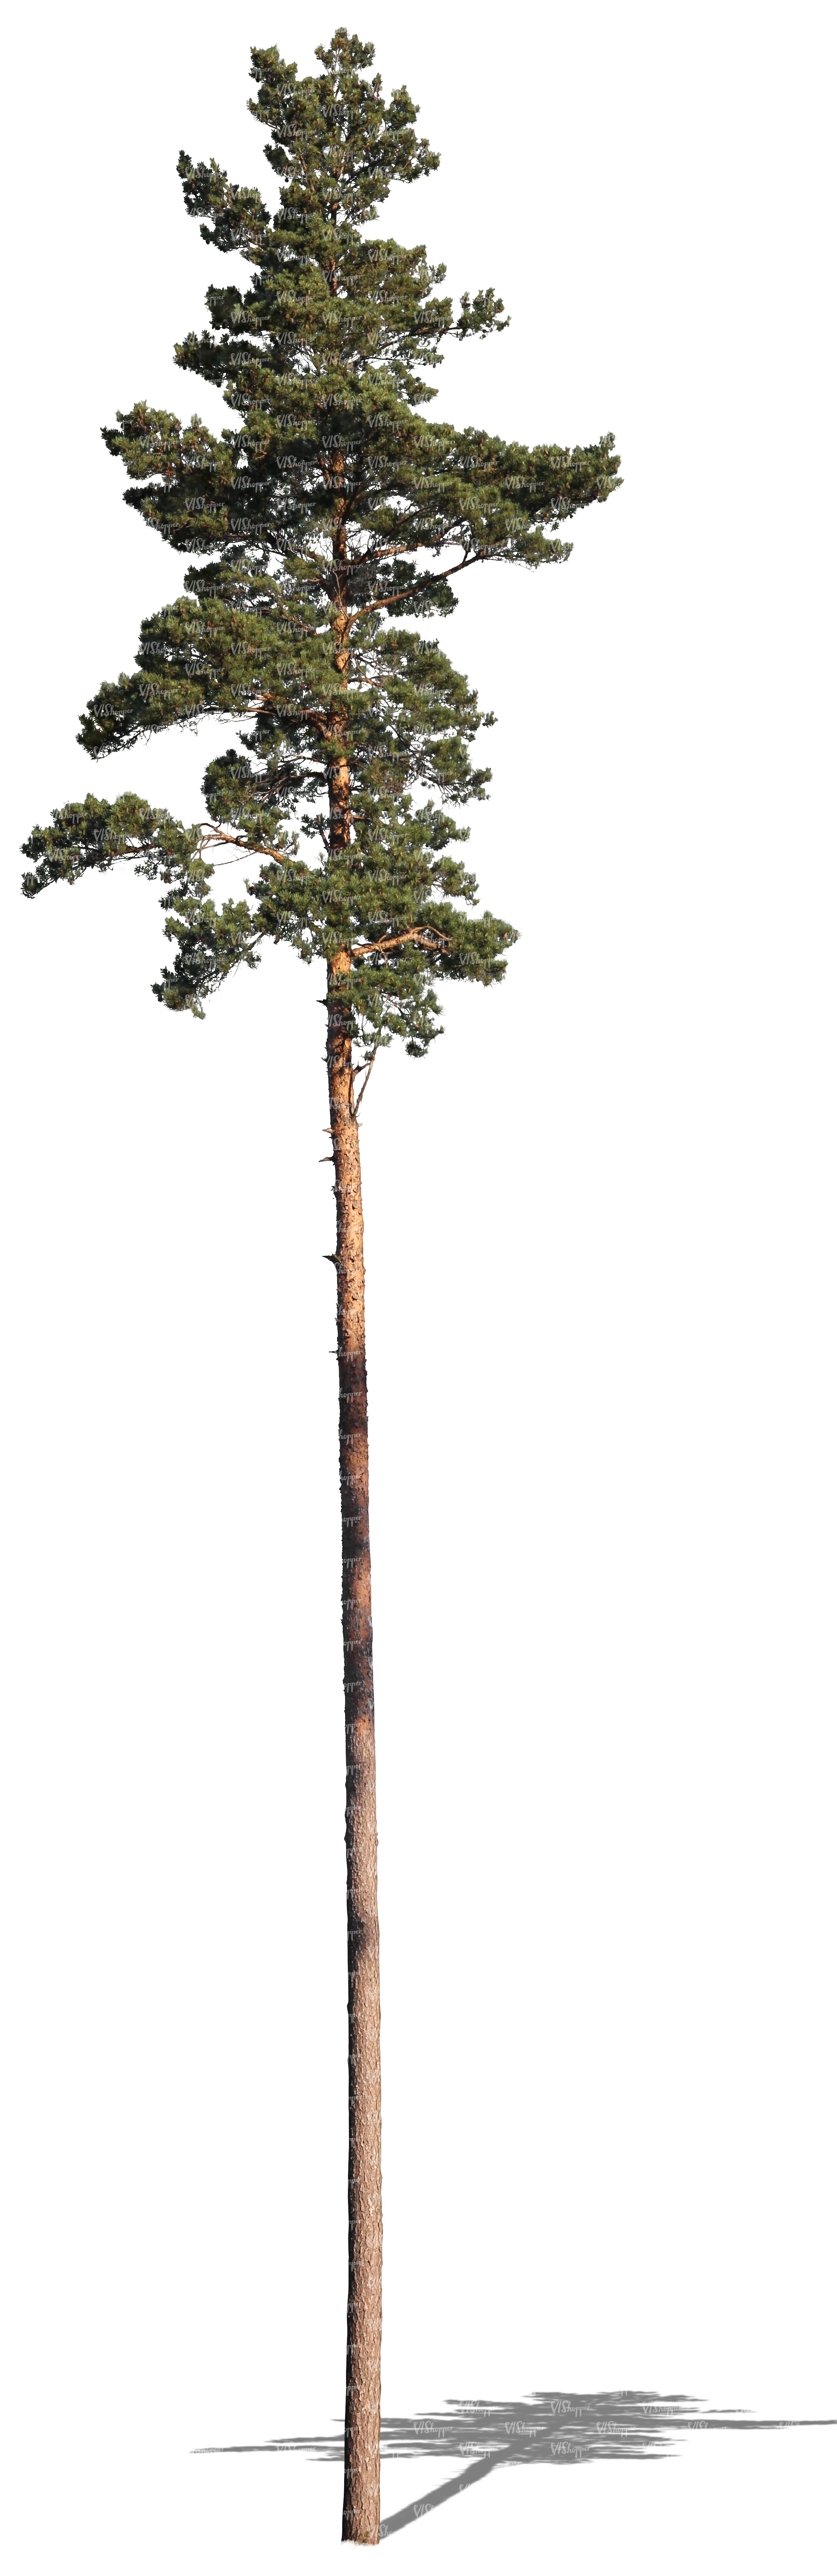 Types Of Tall Trees